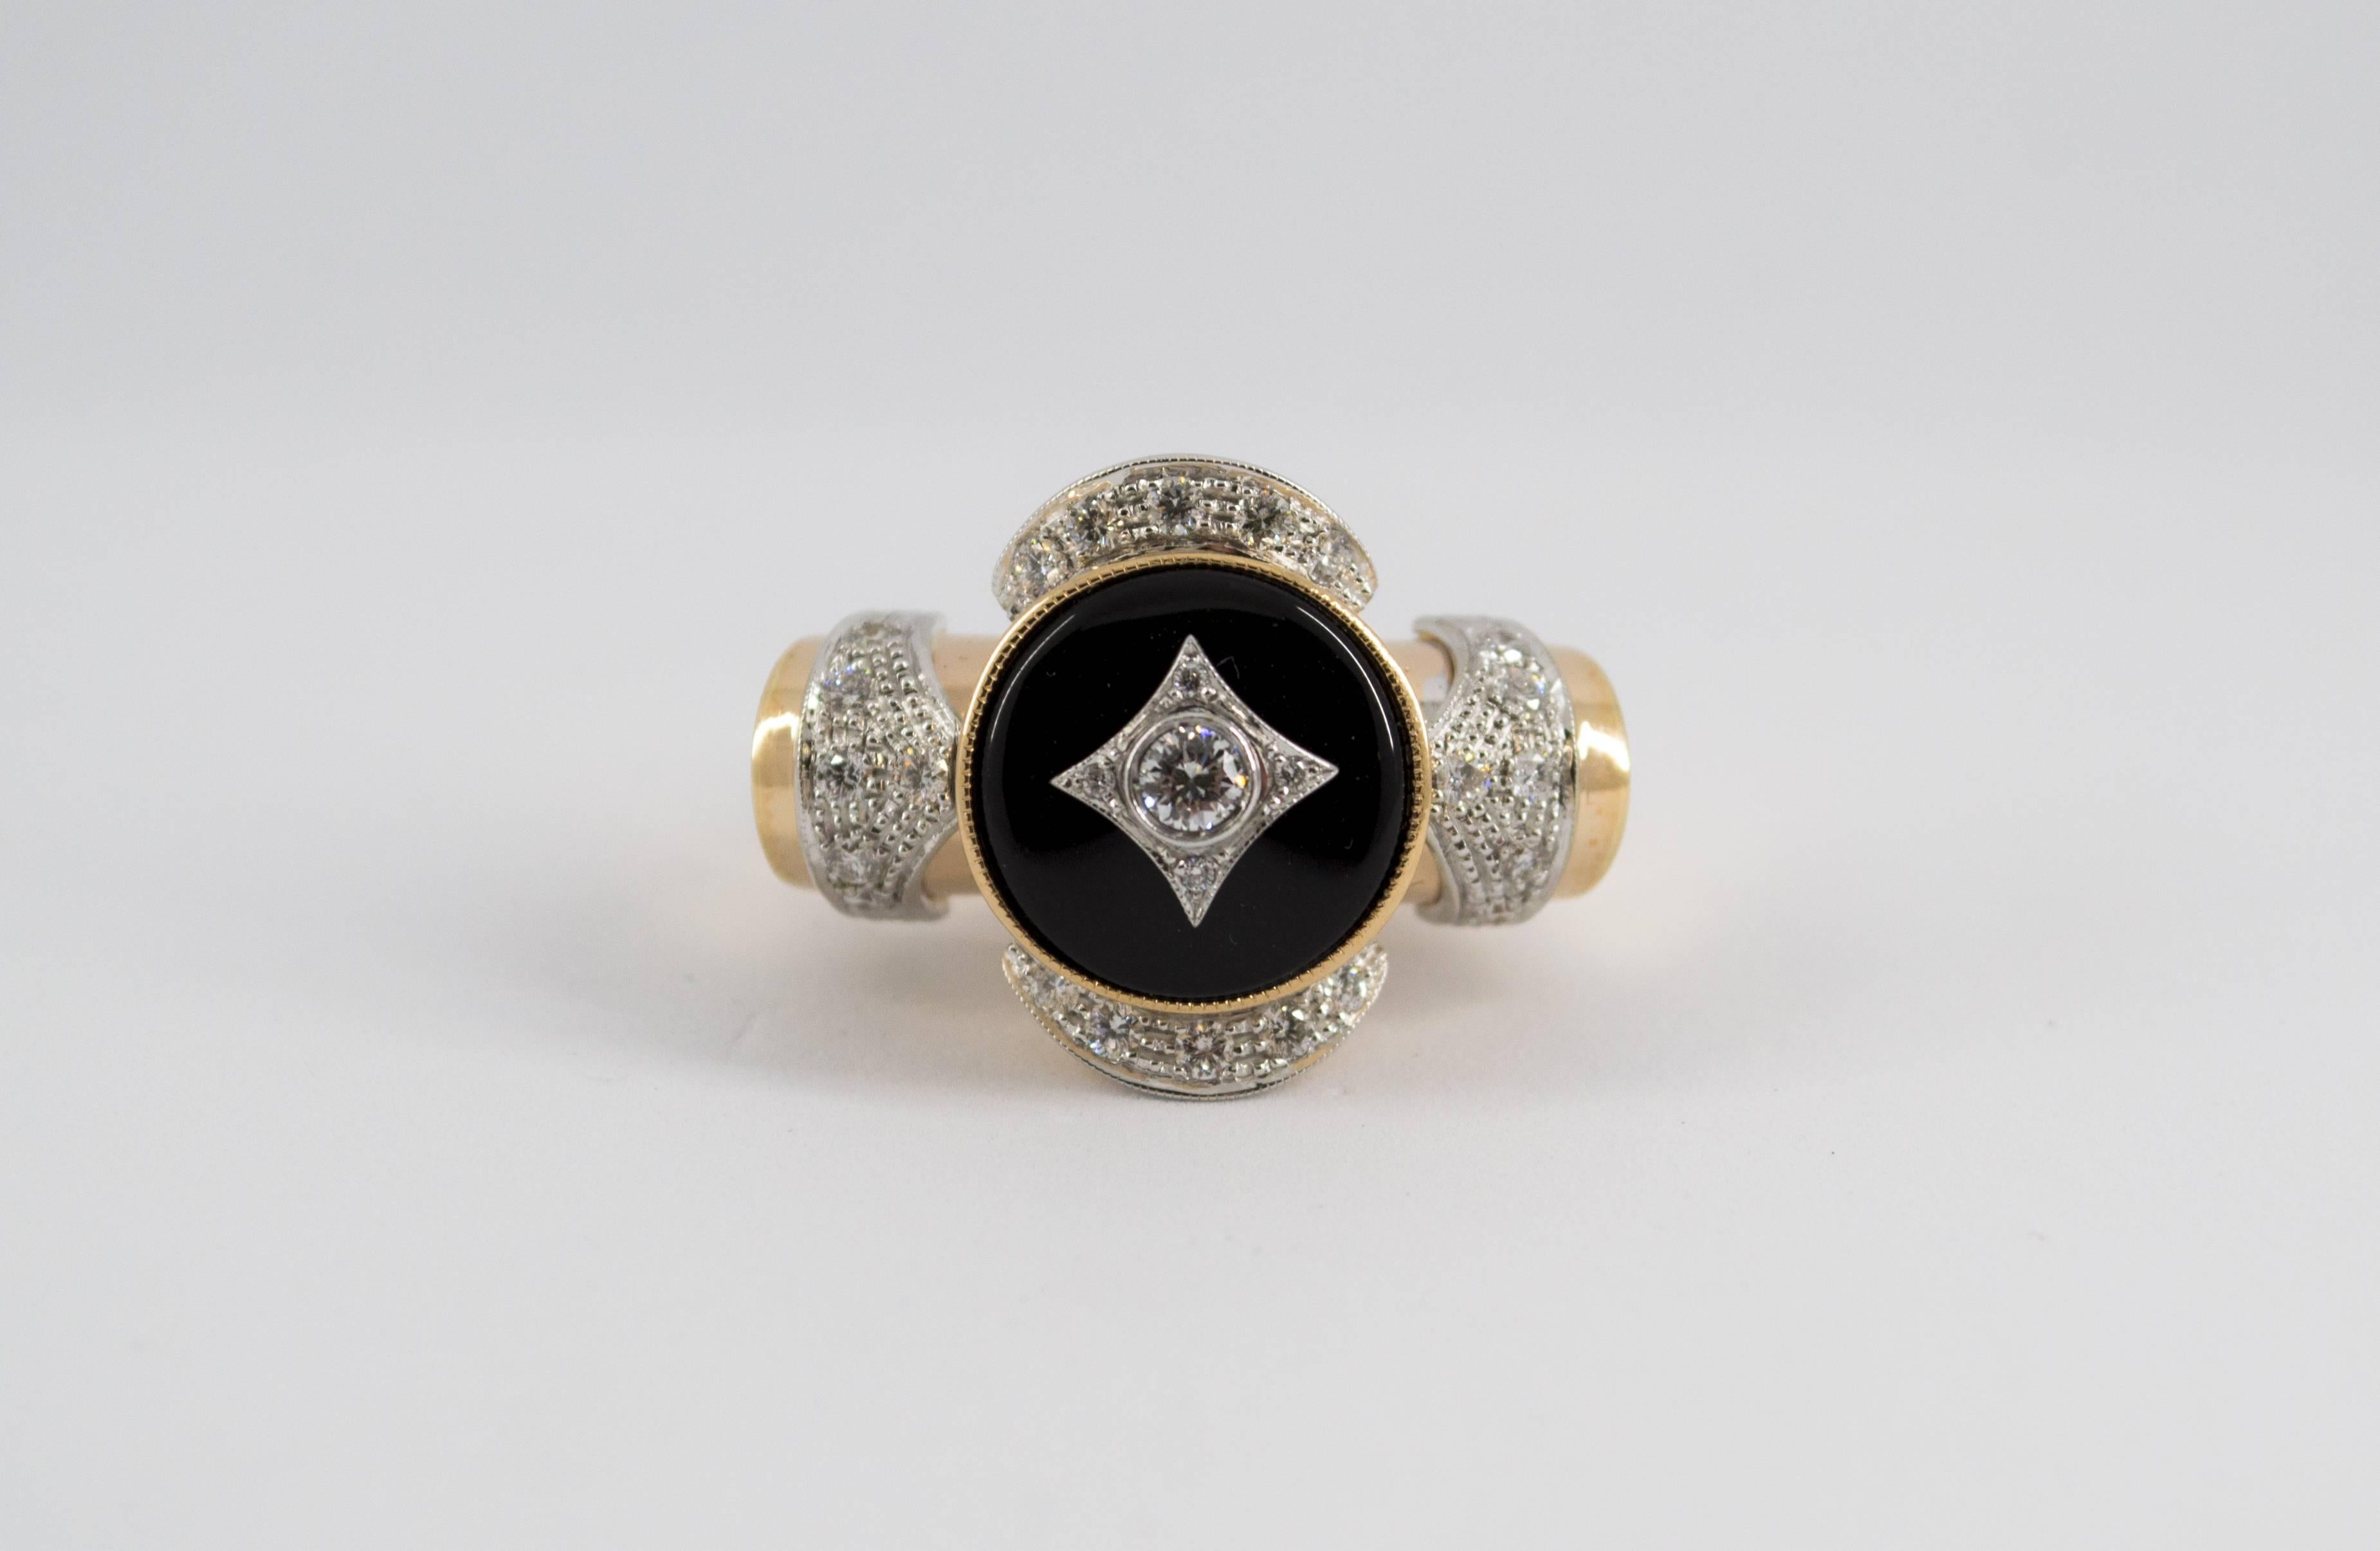 This Ring is made of 14K Yellow Gold.
This Ring has 0.75 Carats of Diamonds.
This Ring has also Onyx.
This Ring is inspired by Renaissance Style.
Size ITA: 17 USA: 8
We're a workshop so every piece is handmade, customizable and resizable.